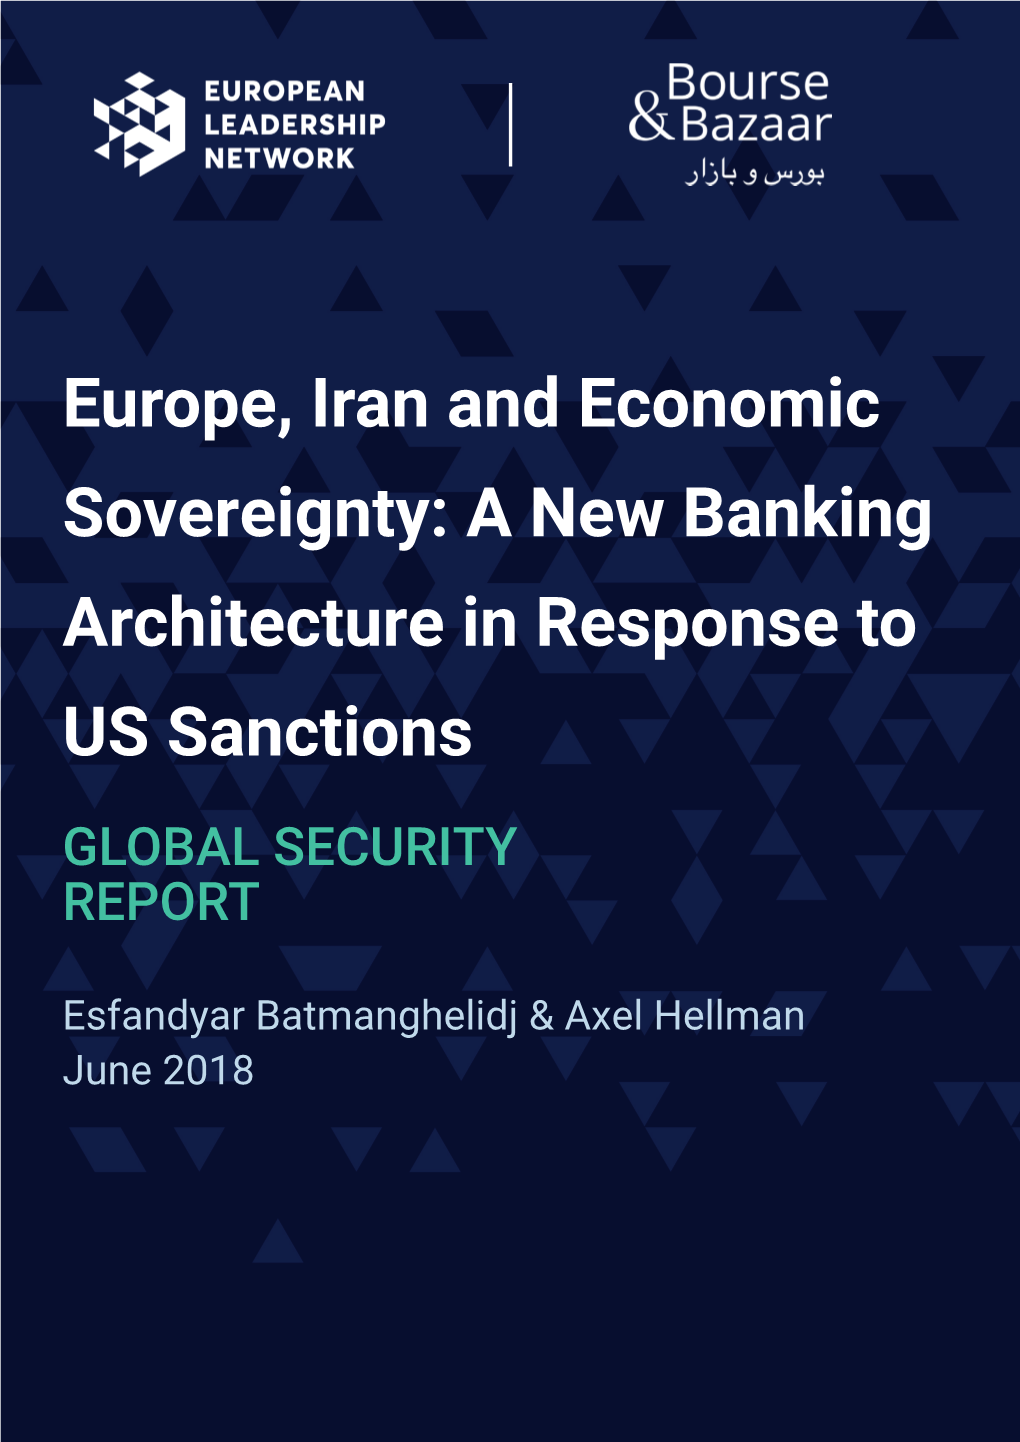 Europe, Iran and Economic Sovereignty: a New Banking Architecture in Response to US Sanctions GLOBAL SECURITY REPORT